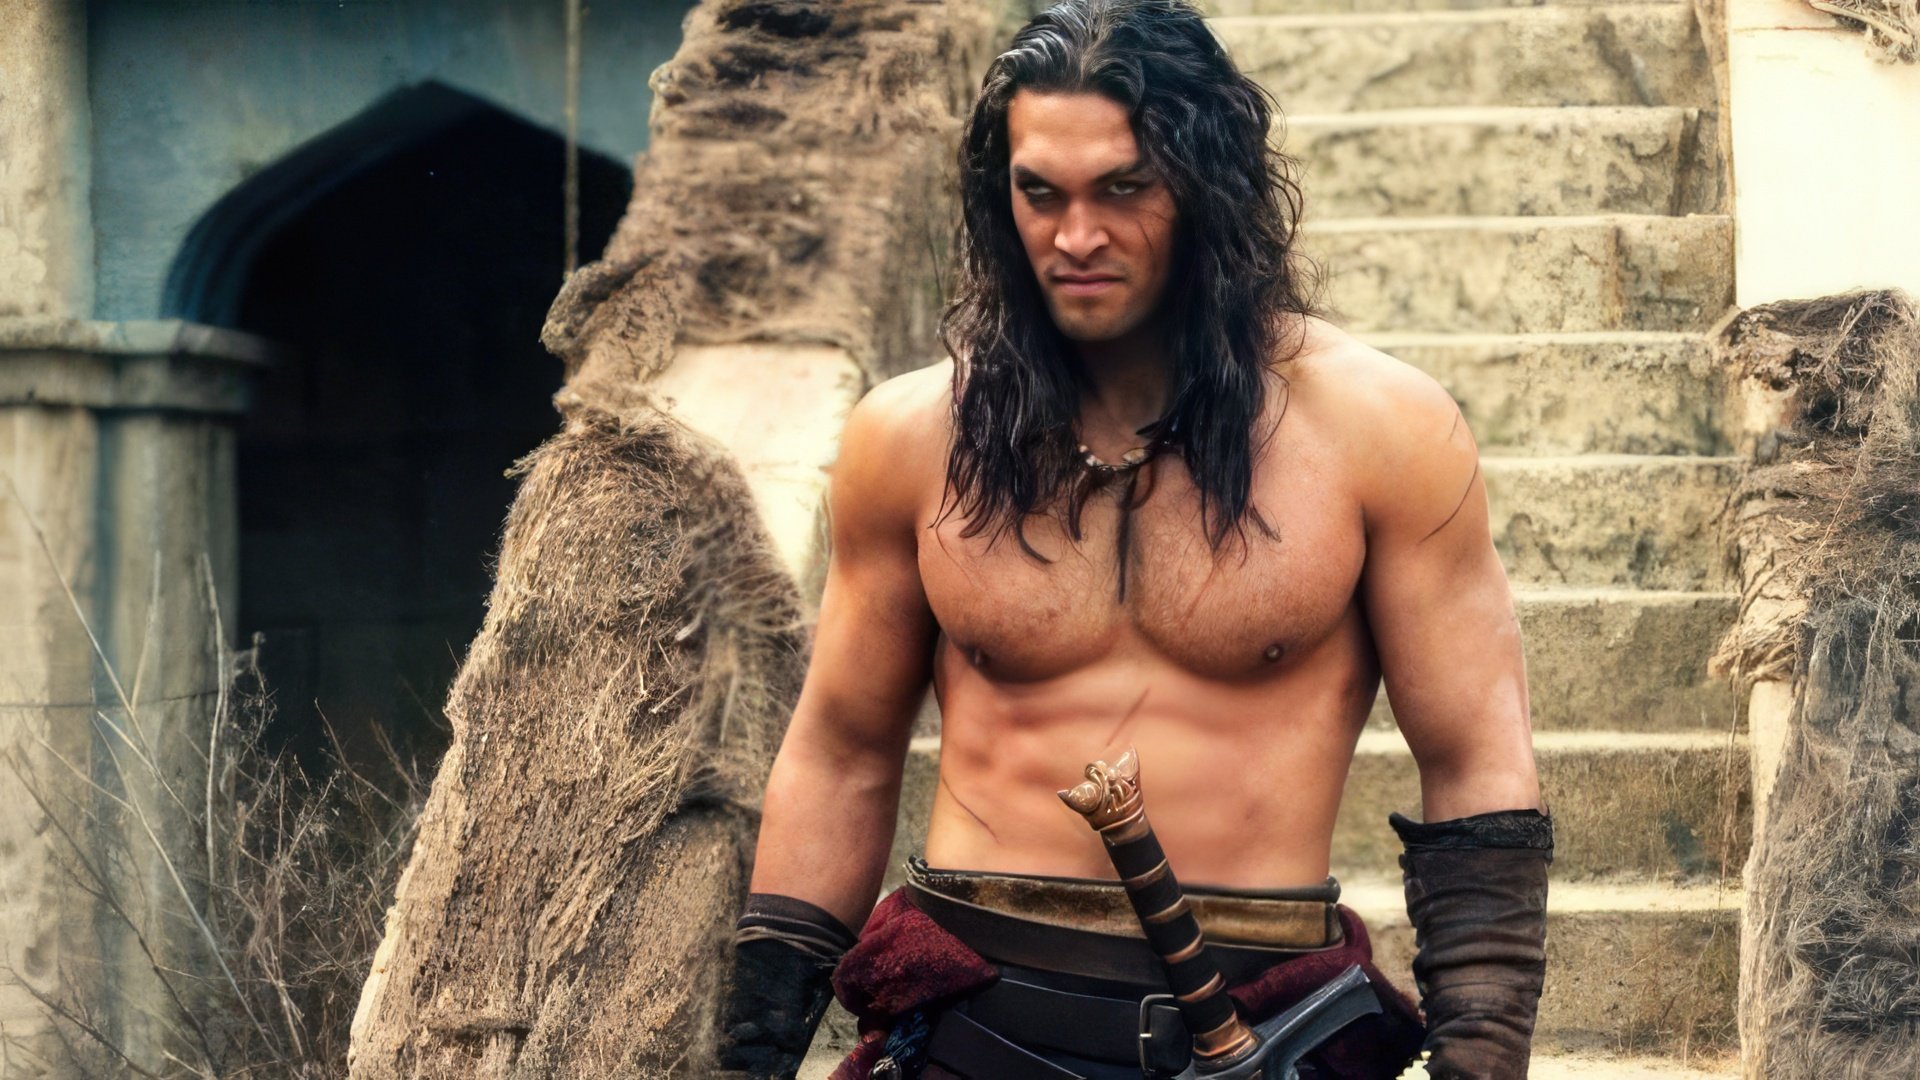 Jason Momoa in the role of Conan the Barbarian